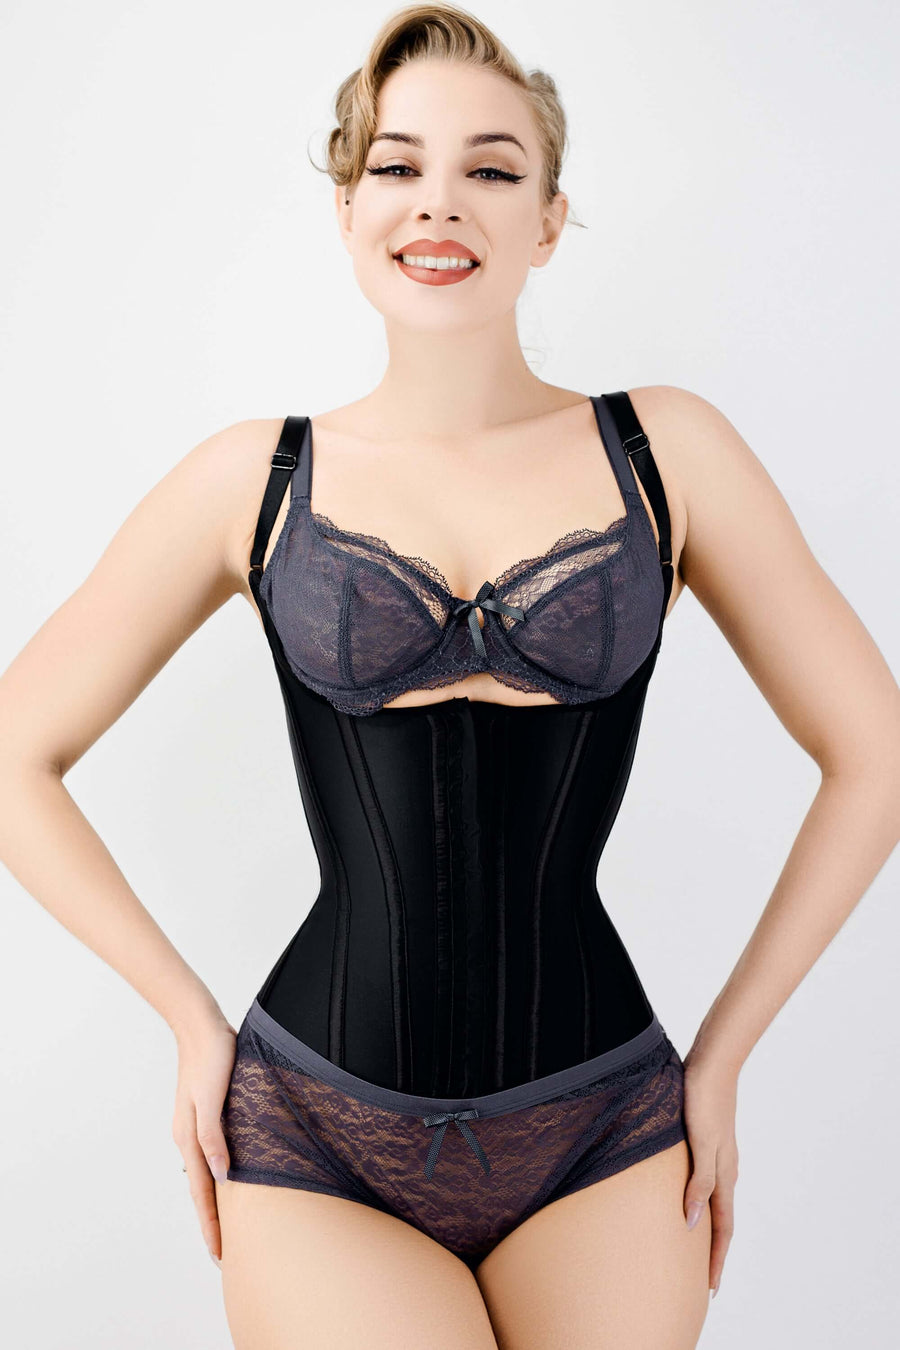 Achieve an Instant Hourglass Figure with Our Comfortable Steel Boned Corsets